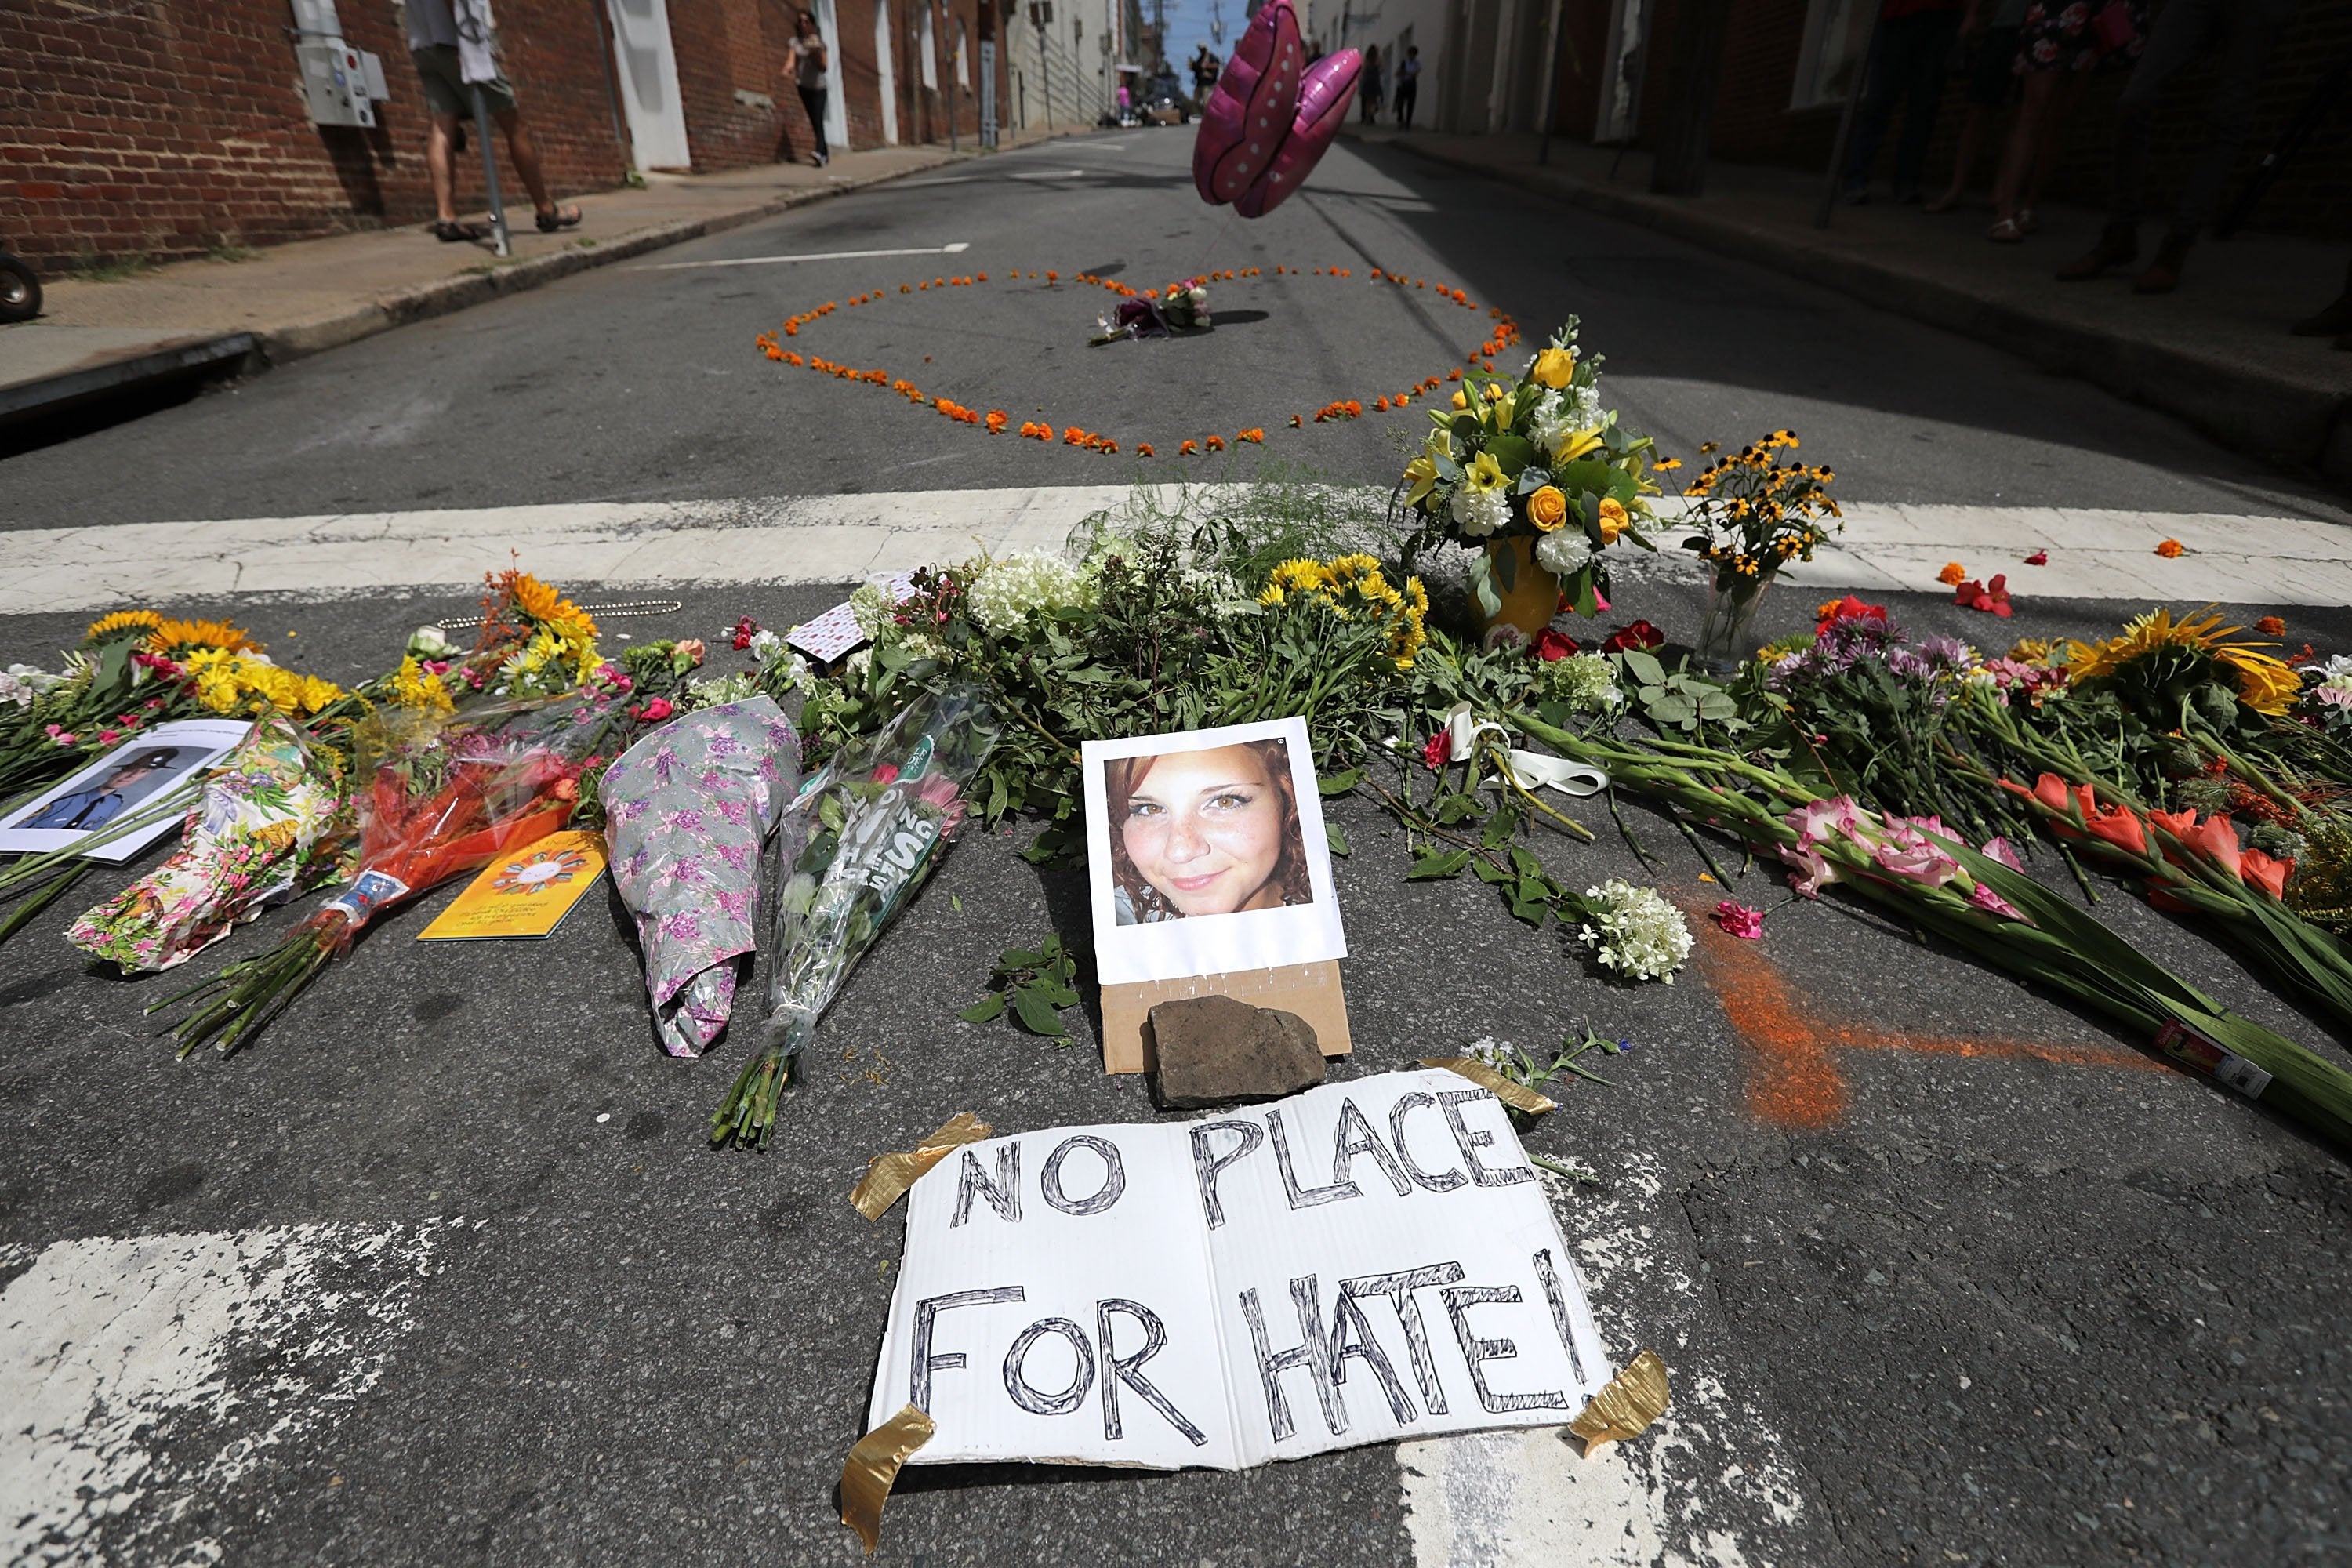 Charlottesville Victim's Mother: I Want Her Death To Be 'A Rallying Cry For Justice'